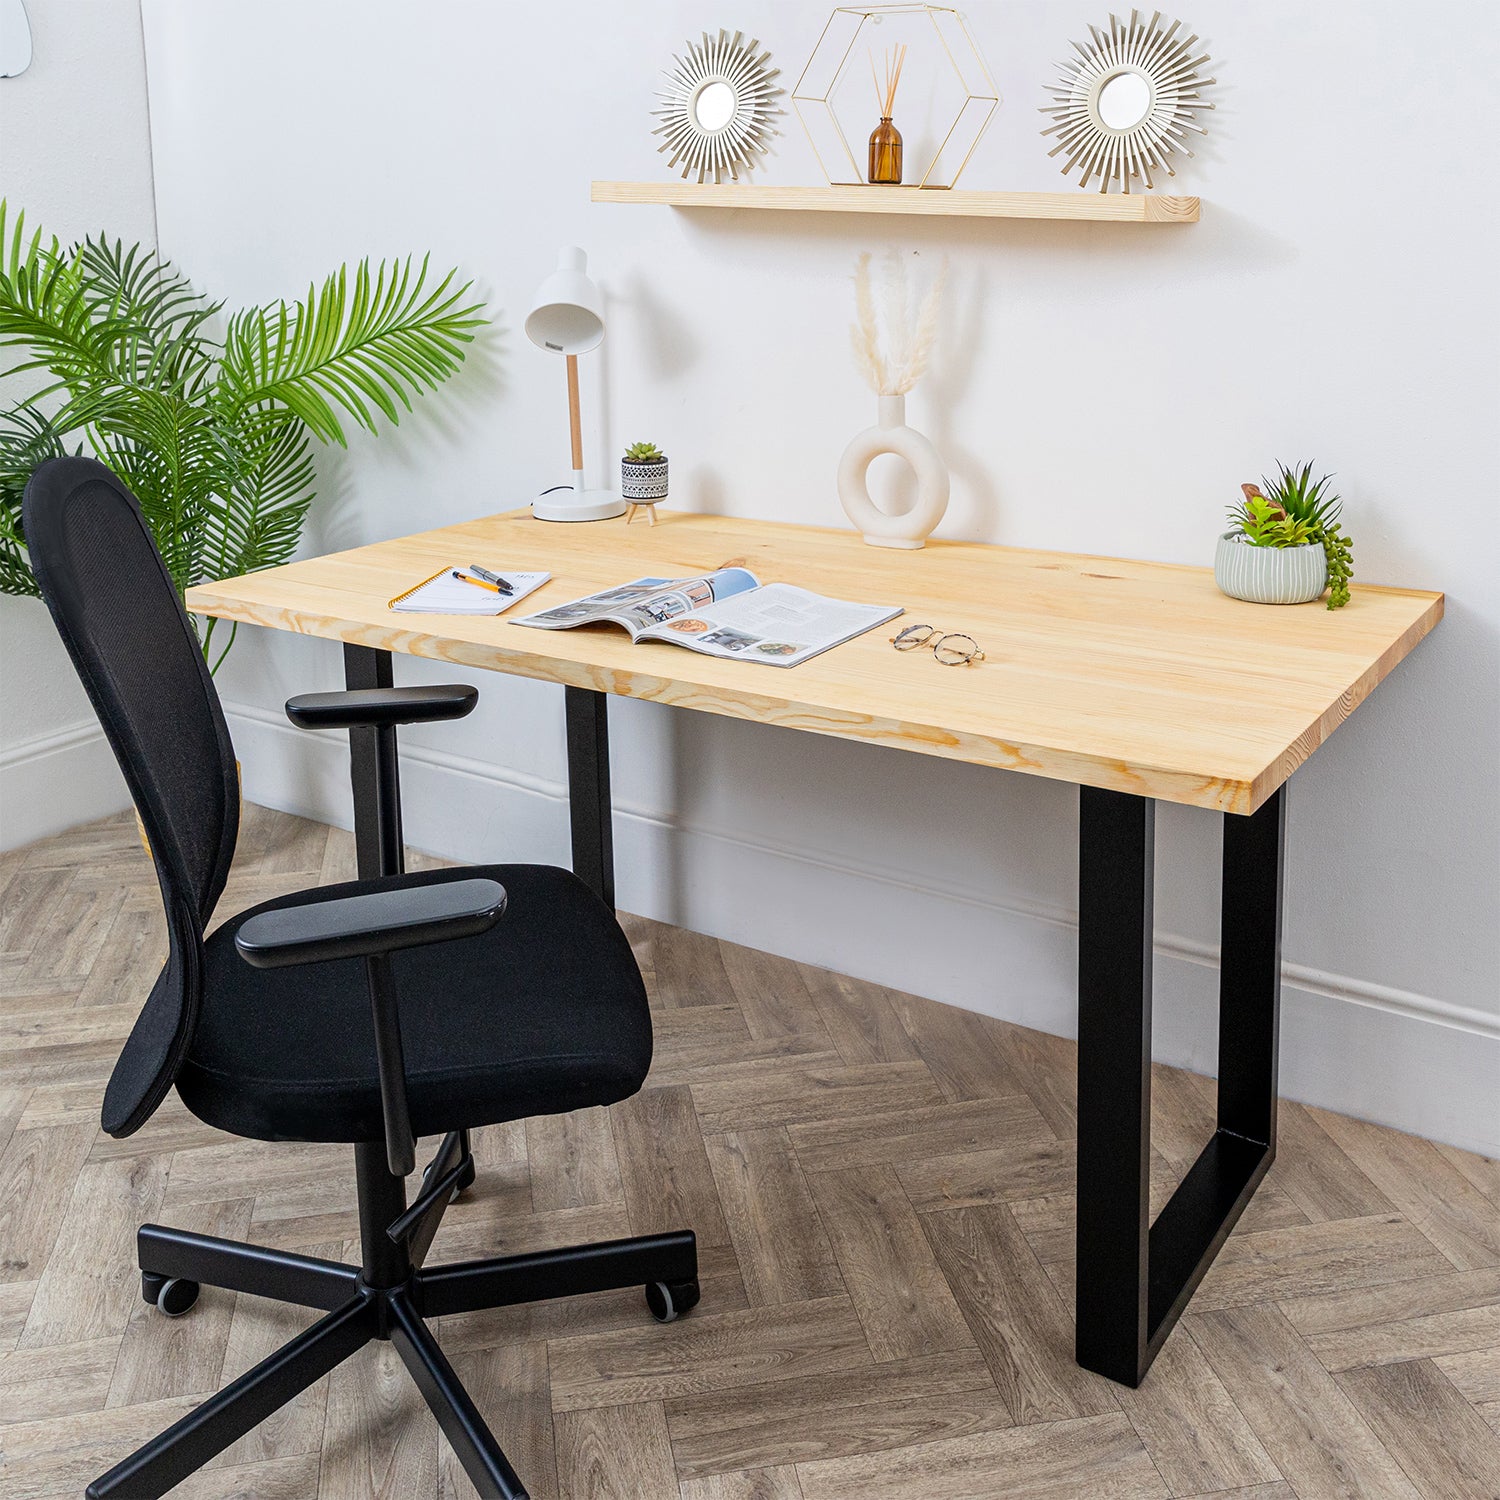 Pine Solid Wood Desk with Square Metal Legs